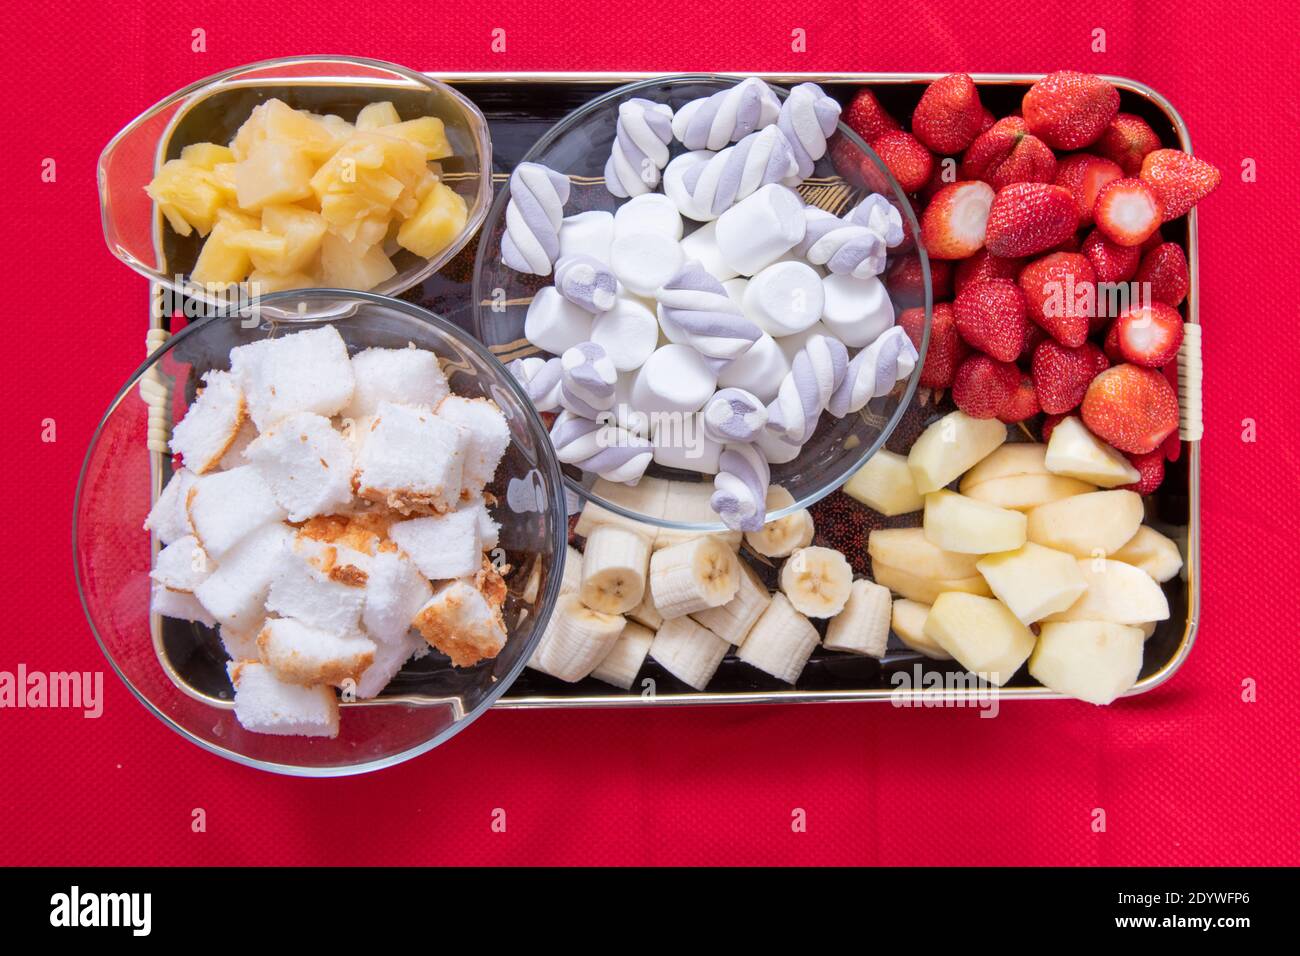 Assorted food for fondue including dessert of strawberries, apples, banana, angel food cake pineapple and marshmallows Stock Photo